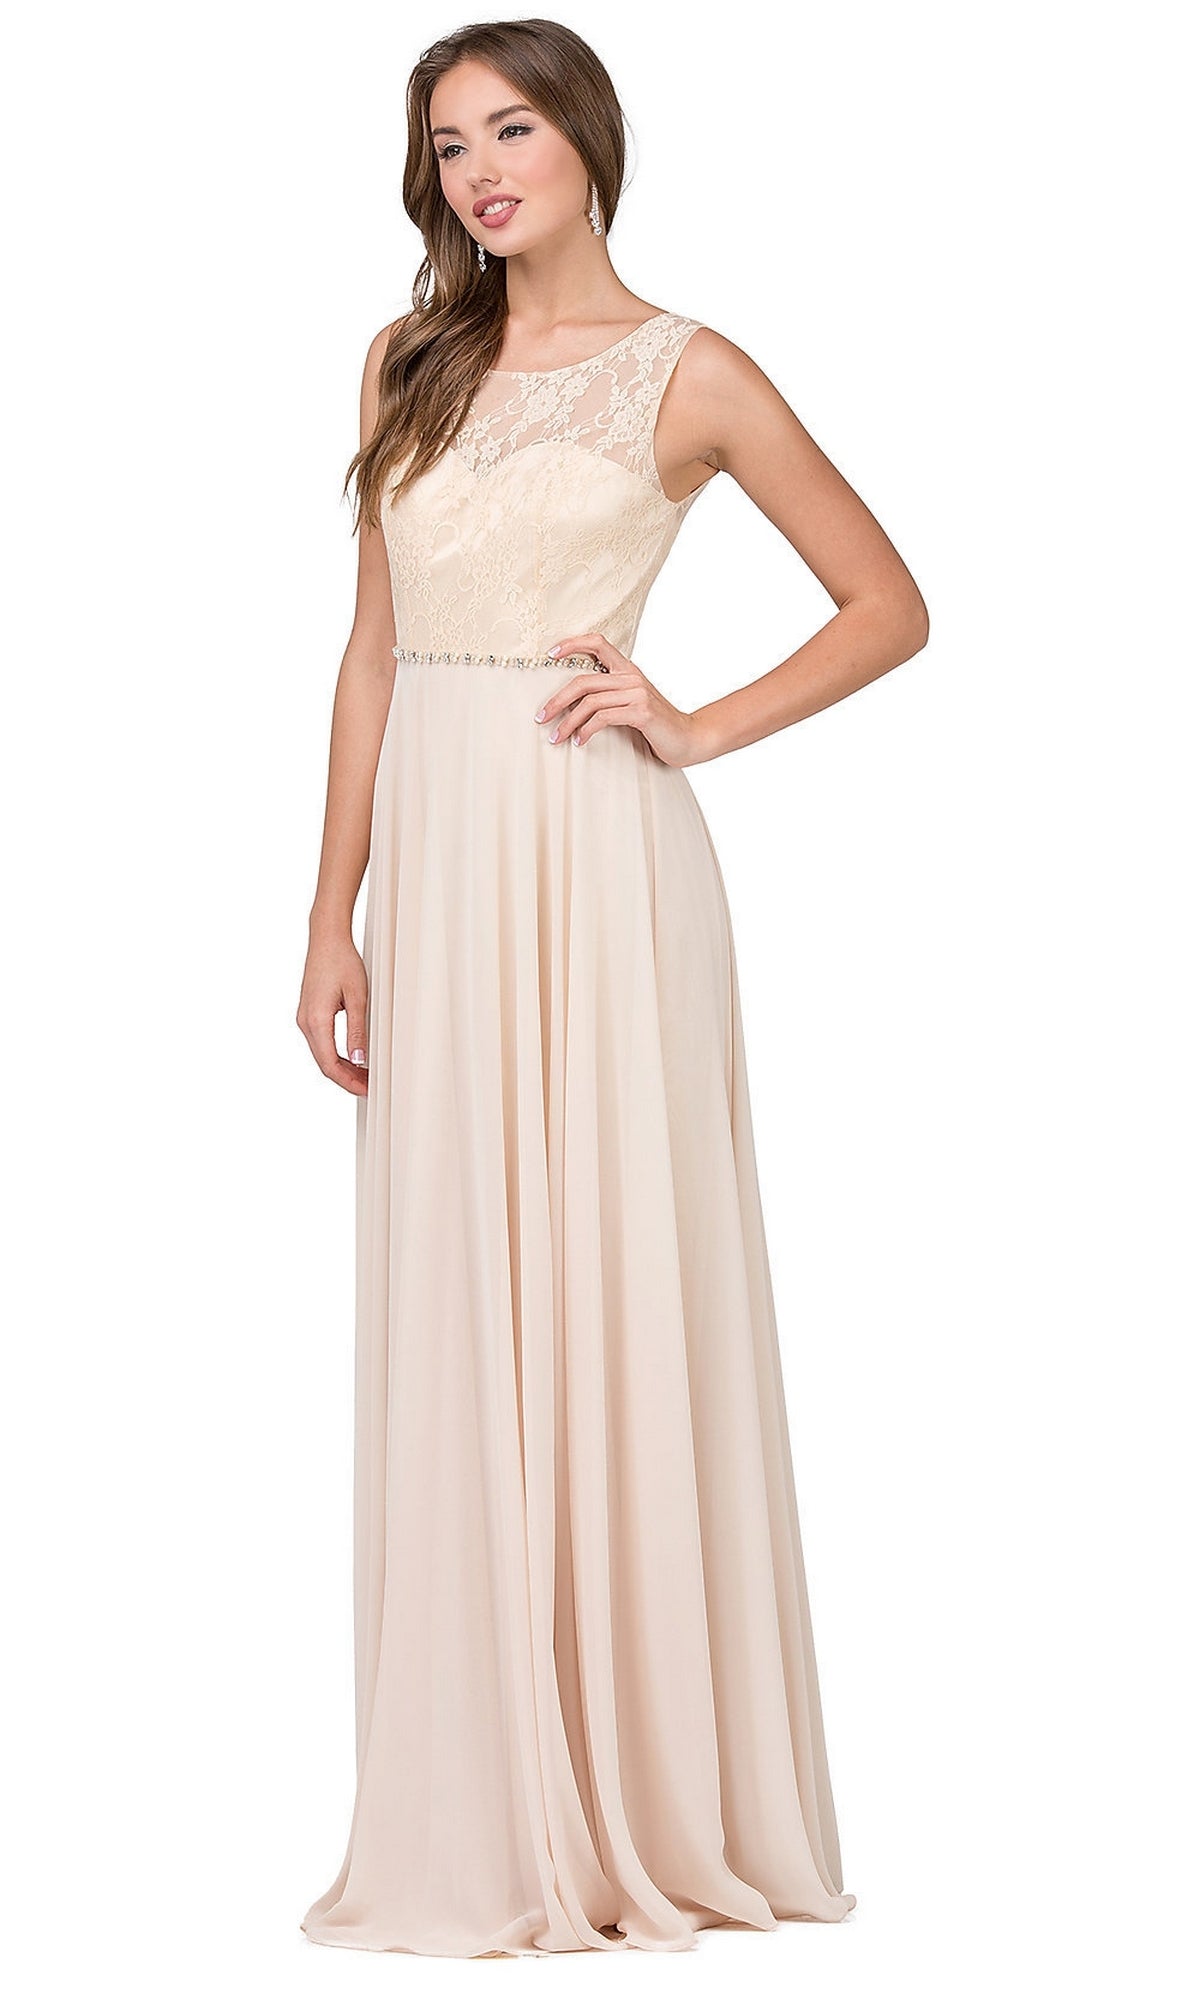 Champagne Chiffon Formal Evening Gown with Lace Bodice